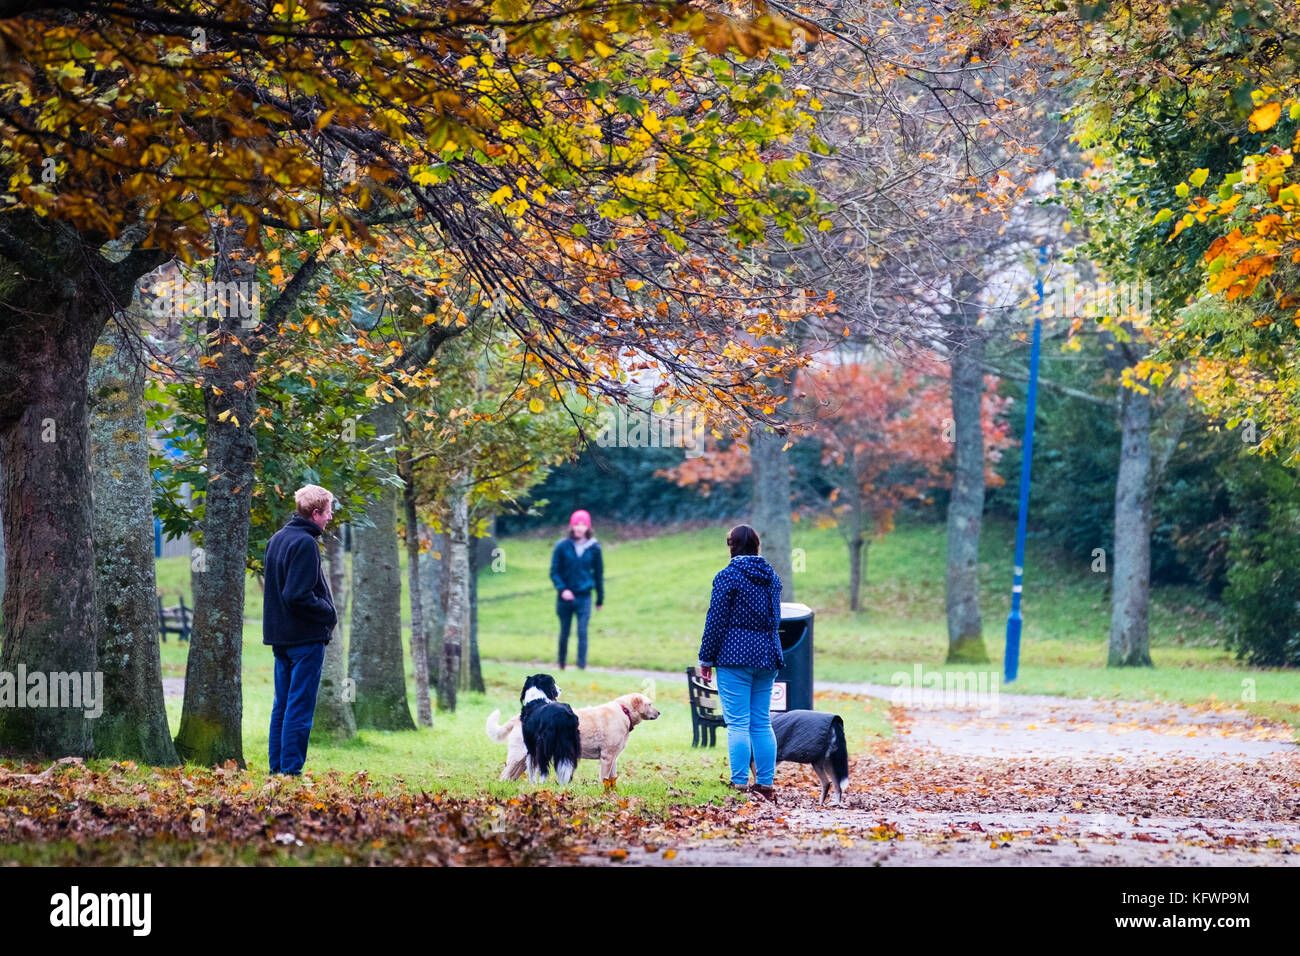 Aberystwyth Wales UK, Wednesday 1 November 2017 UK weather: People walking along Plascrug Avenue in Aberystwyth on the first day of November, with all the deciduous trees shedding their leaves in a myriad of rich autumnal colours photo Credit: Keith Morris/Alamy Live News Stock Photo